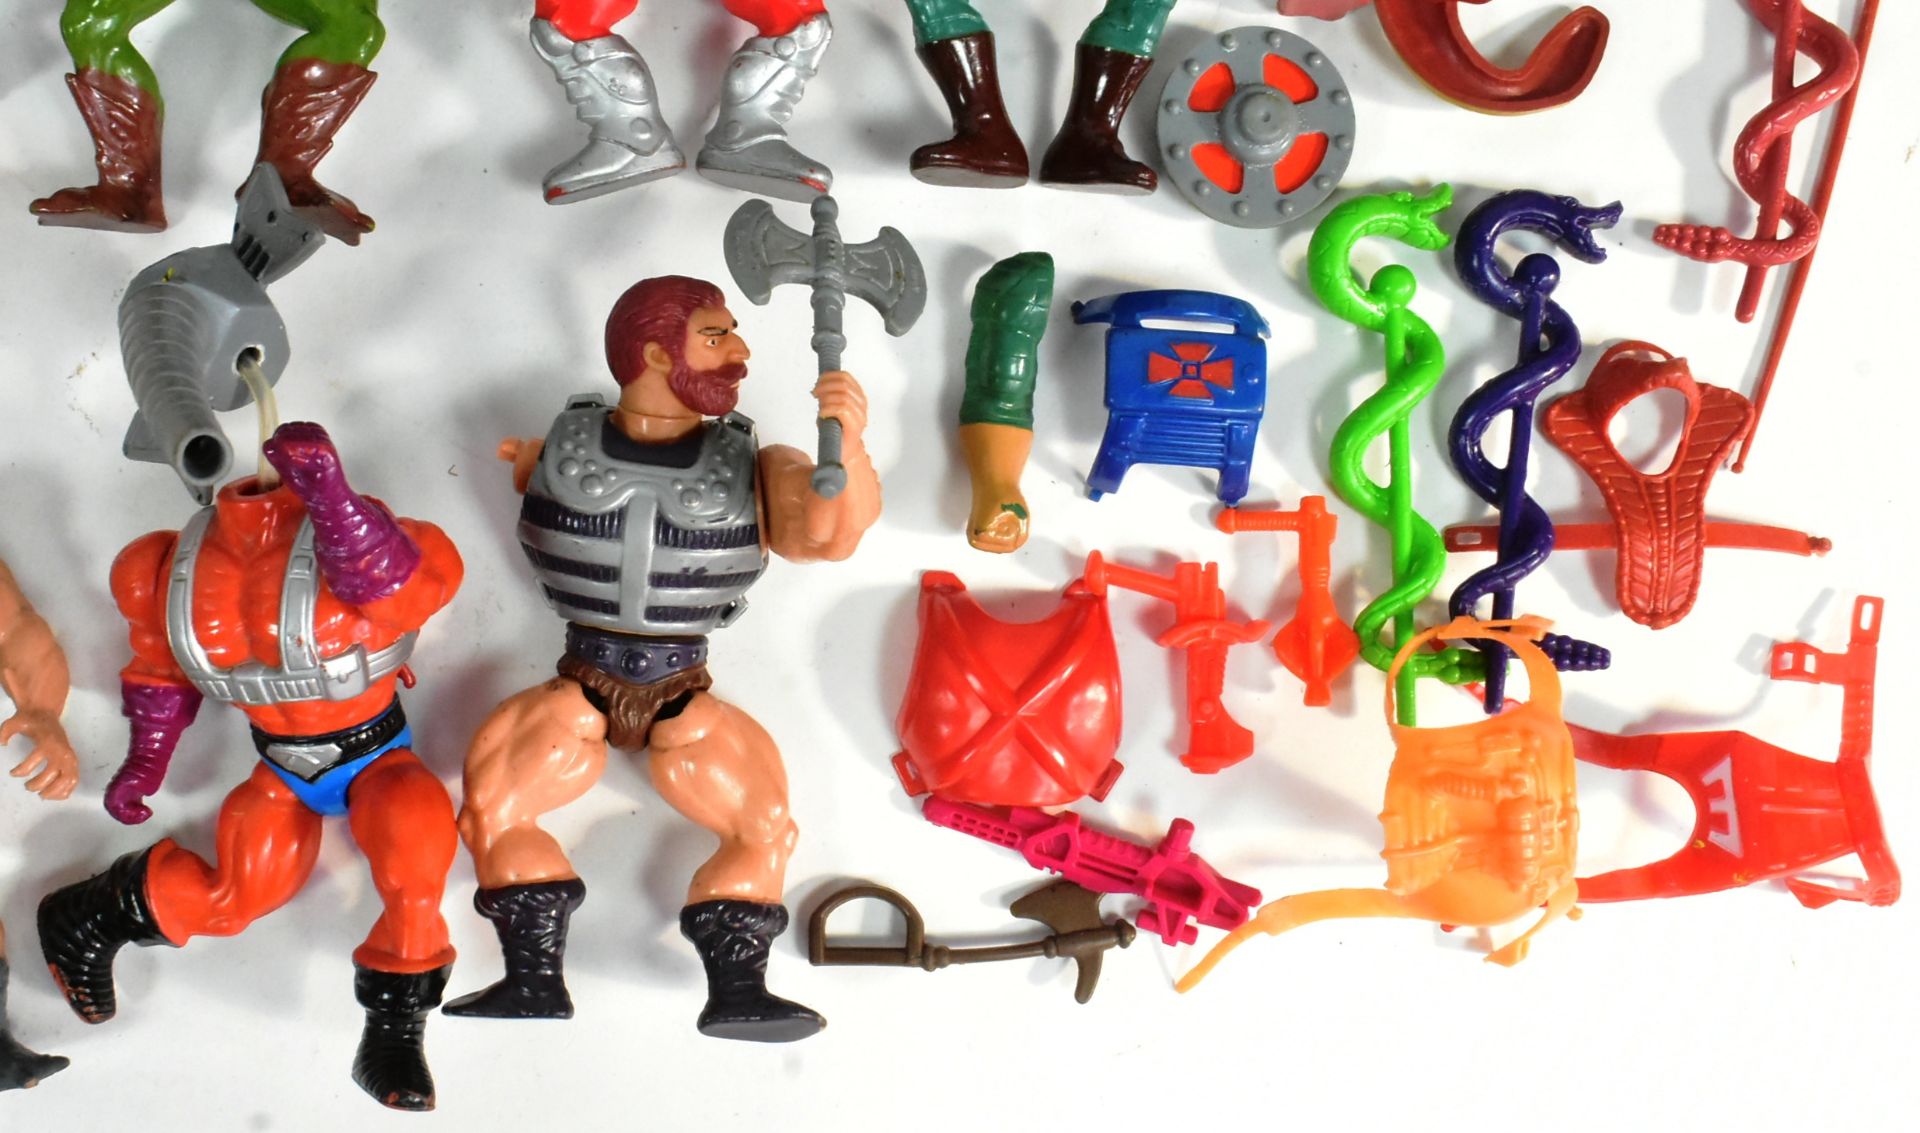 MASTERS OF THE UNIVERSE - MOTU - COLLECTION OF ACTION FIGURES - Image 4 of 6